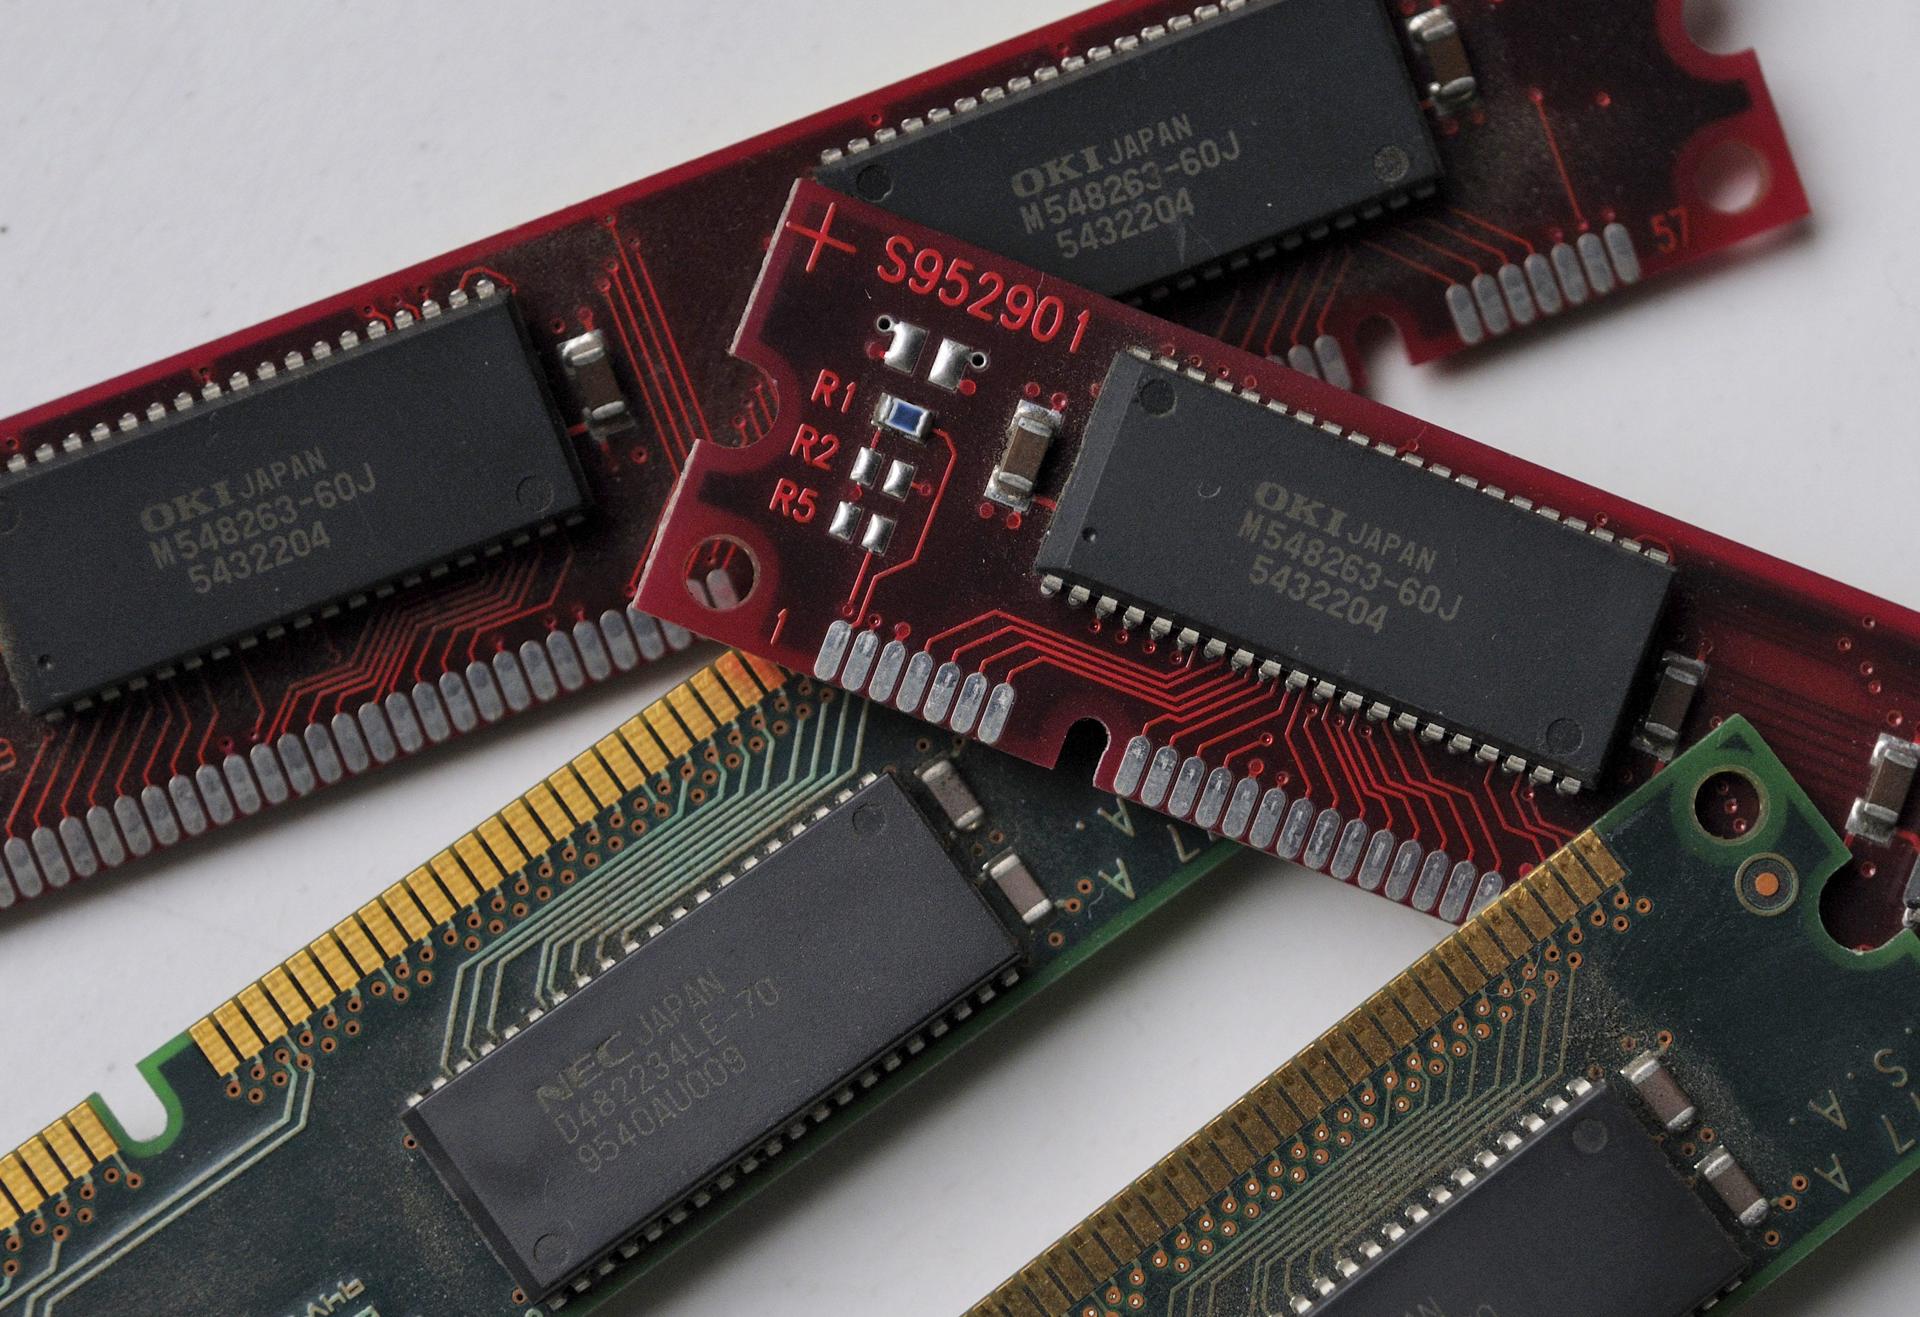 An image showing a stack of Japan-made RAM computer memory chips, Frankfurt, Germany, 17 March 2011. EPA FILE/MAURITZ ANTIN